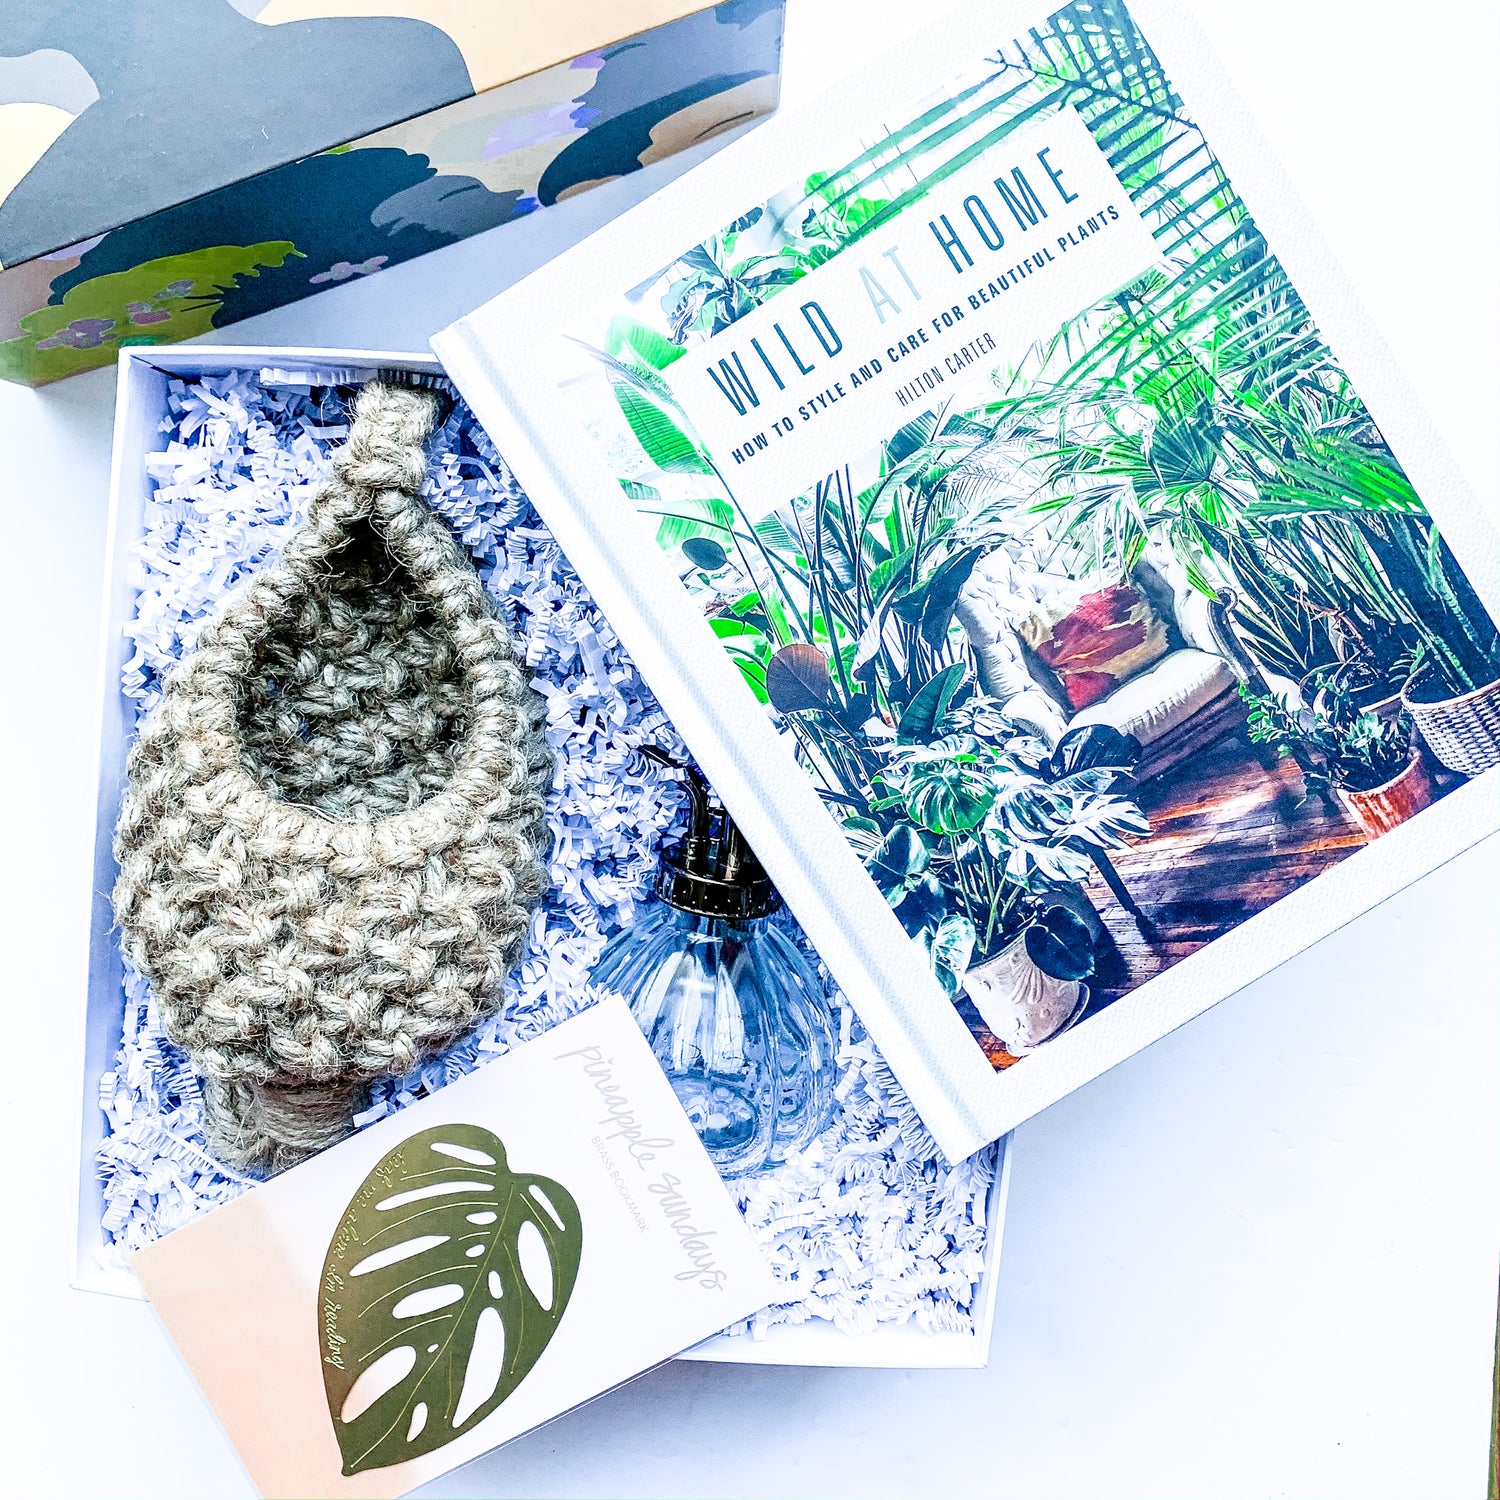 Gift box featuring a jute plant pod, for a small plant, a clear plant mister, a brass monstera bookmark, a book on how to style and care for your beautiful plants by Hilton Carter